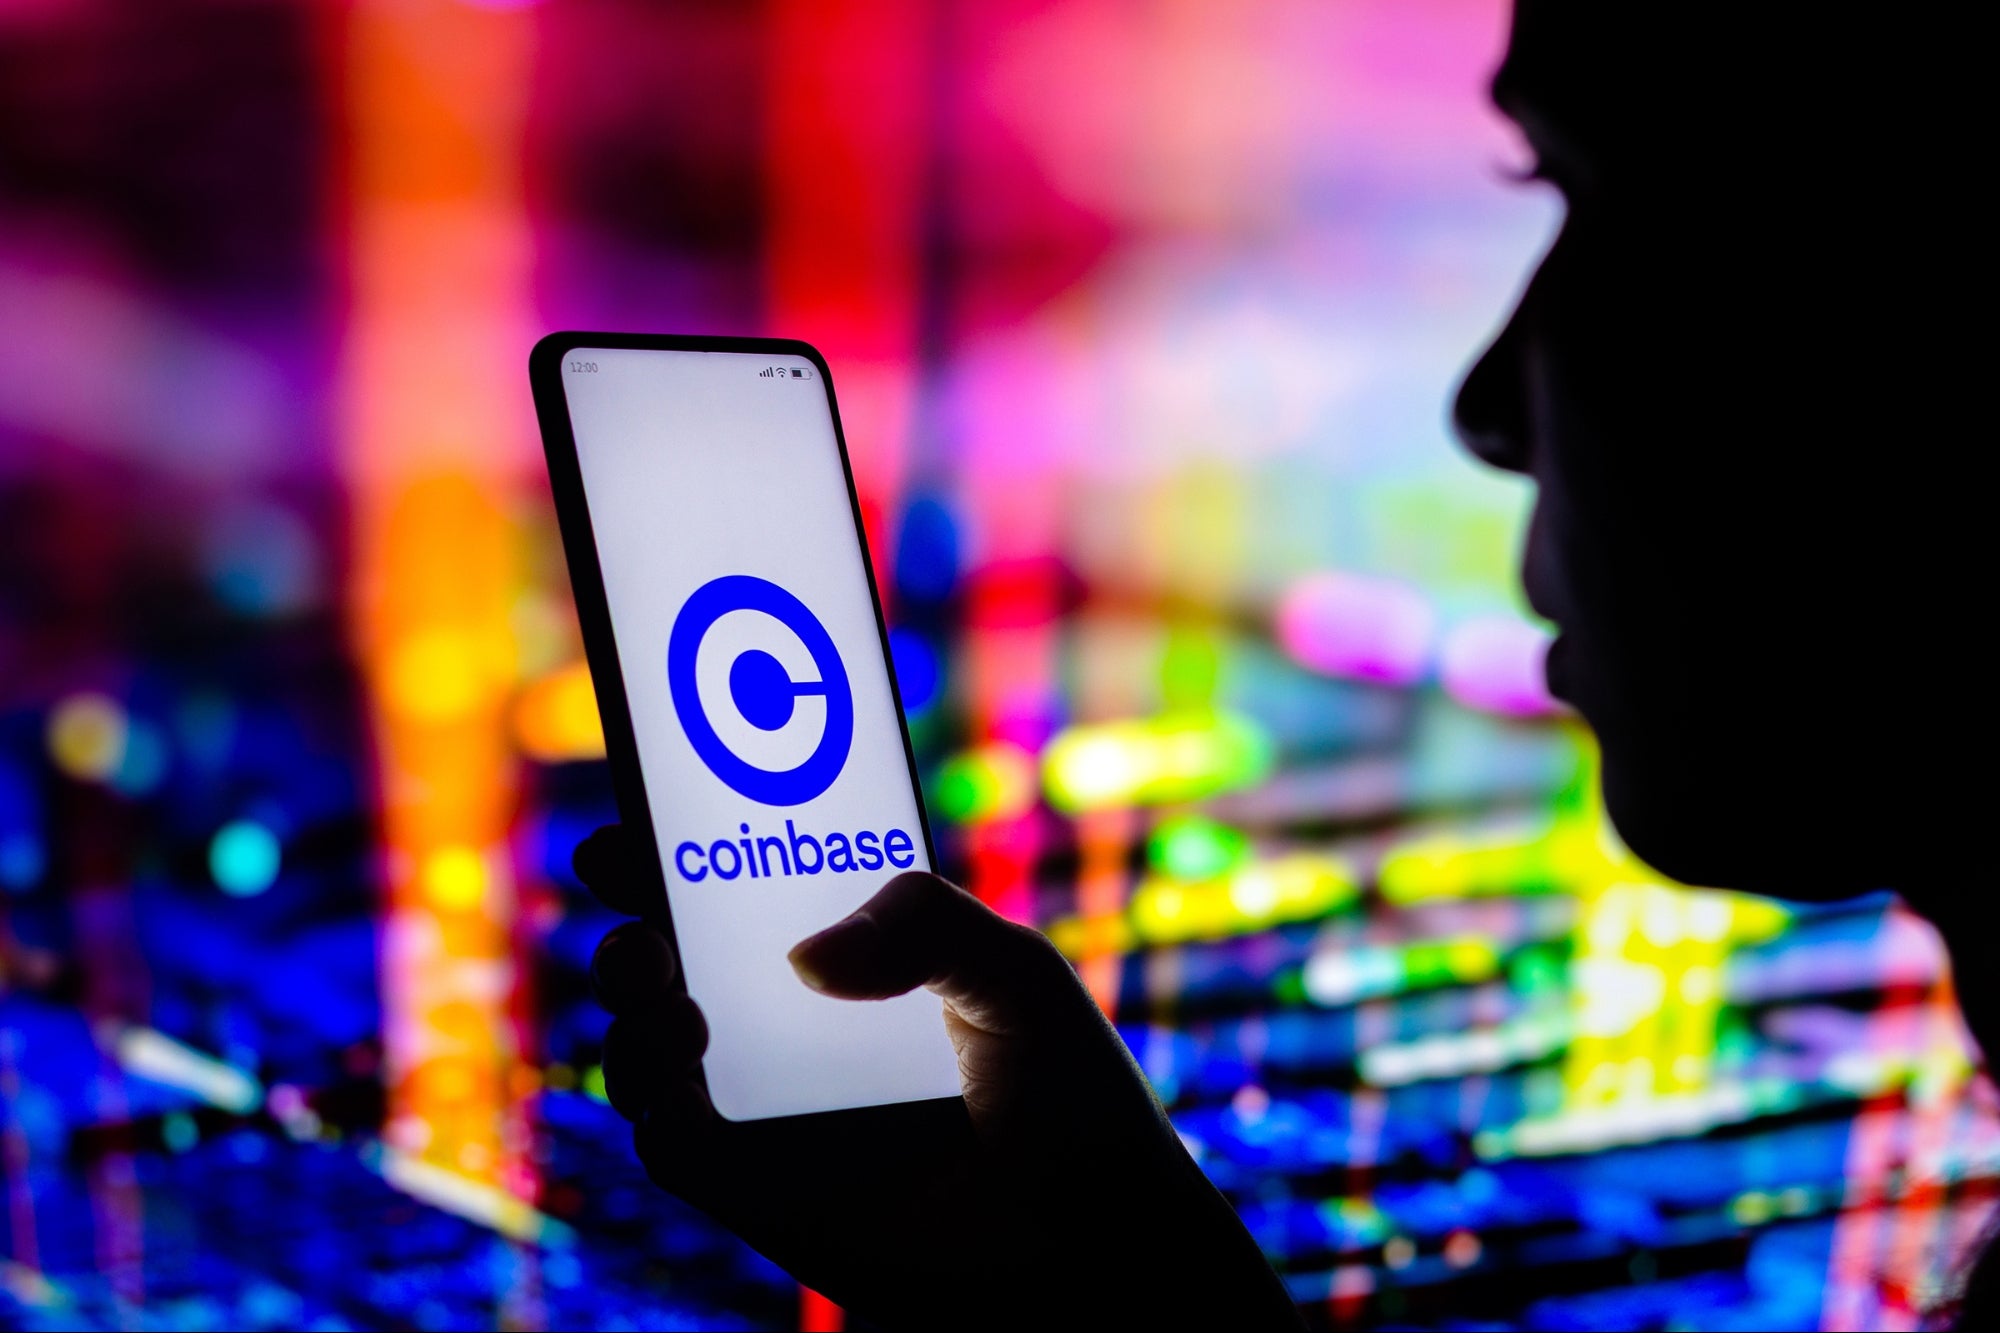 Coinbase NFT is already operating, the marketplace that aims to democratize investment in non-fungible digital tokens